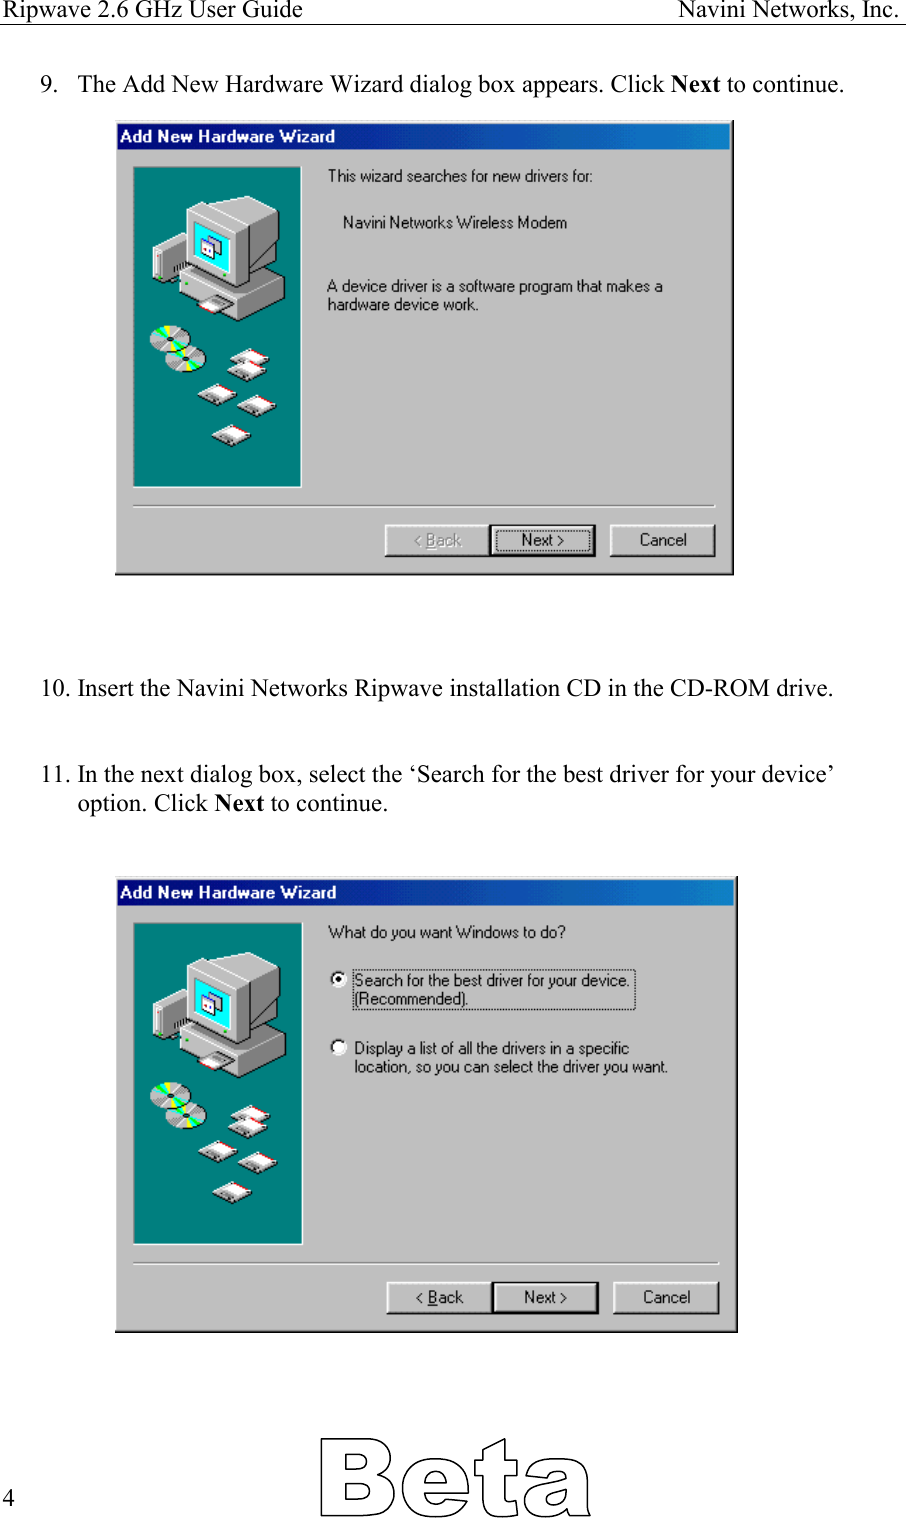 Ripwave 2.6 GHz User Guide                                                            Navini Networks, Inc. 9.  The Add New Hardware Wizard dialog box appears. Click Next to continue.                     10. Insert the Navini Networks Ripwave installation CD in the CD-ROM drive.    11. In the next dialog box, select the ‘Search for the best driver for your device’ option. Click Next to continue.                         4